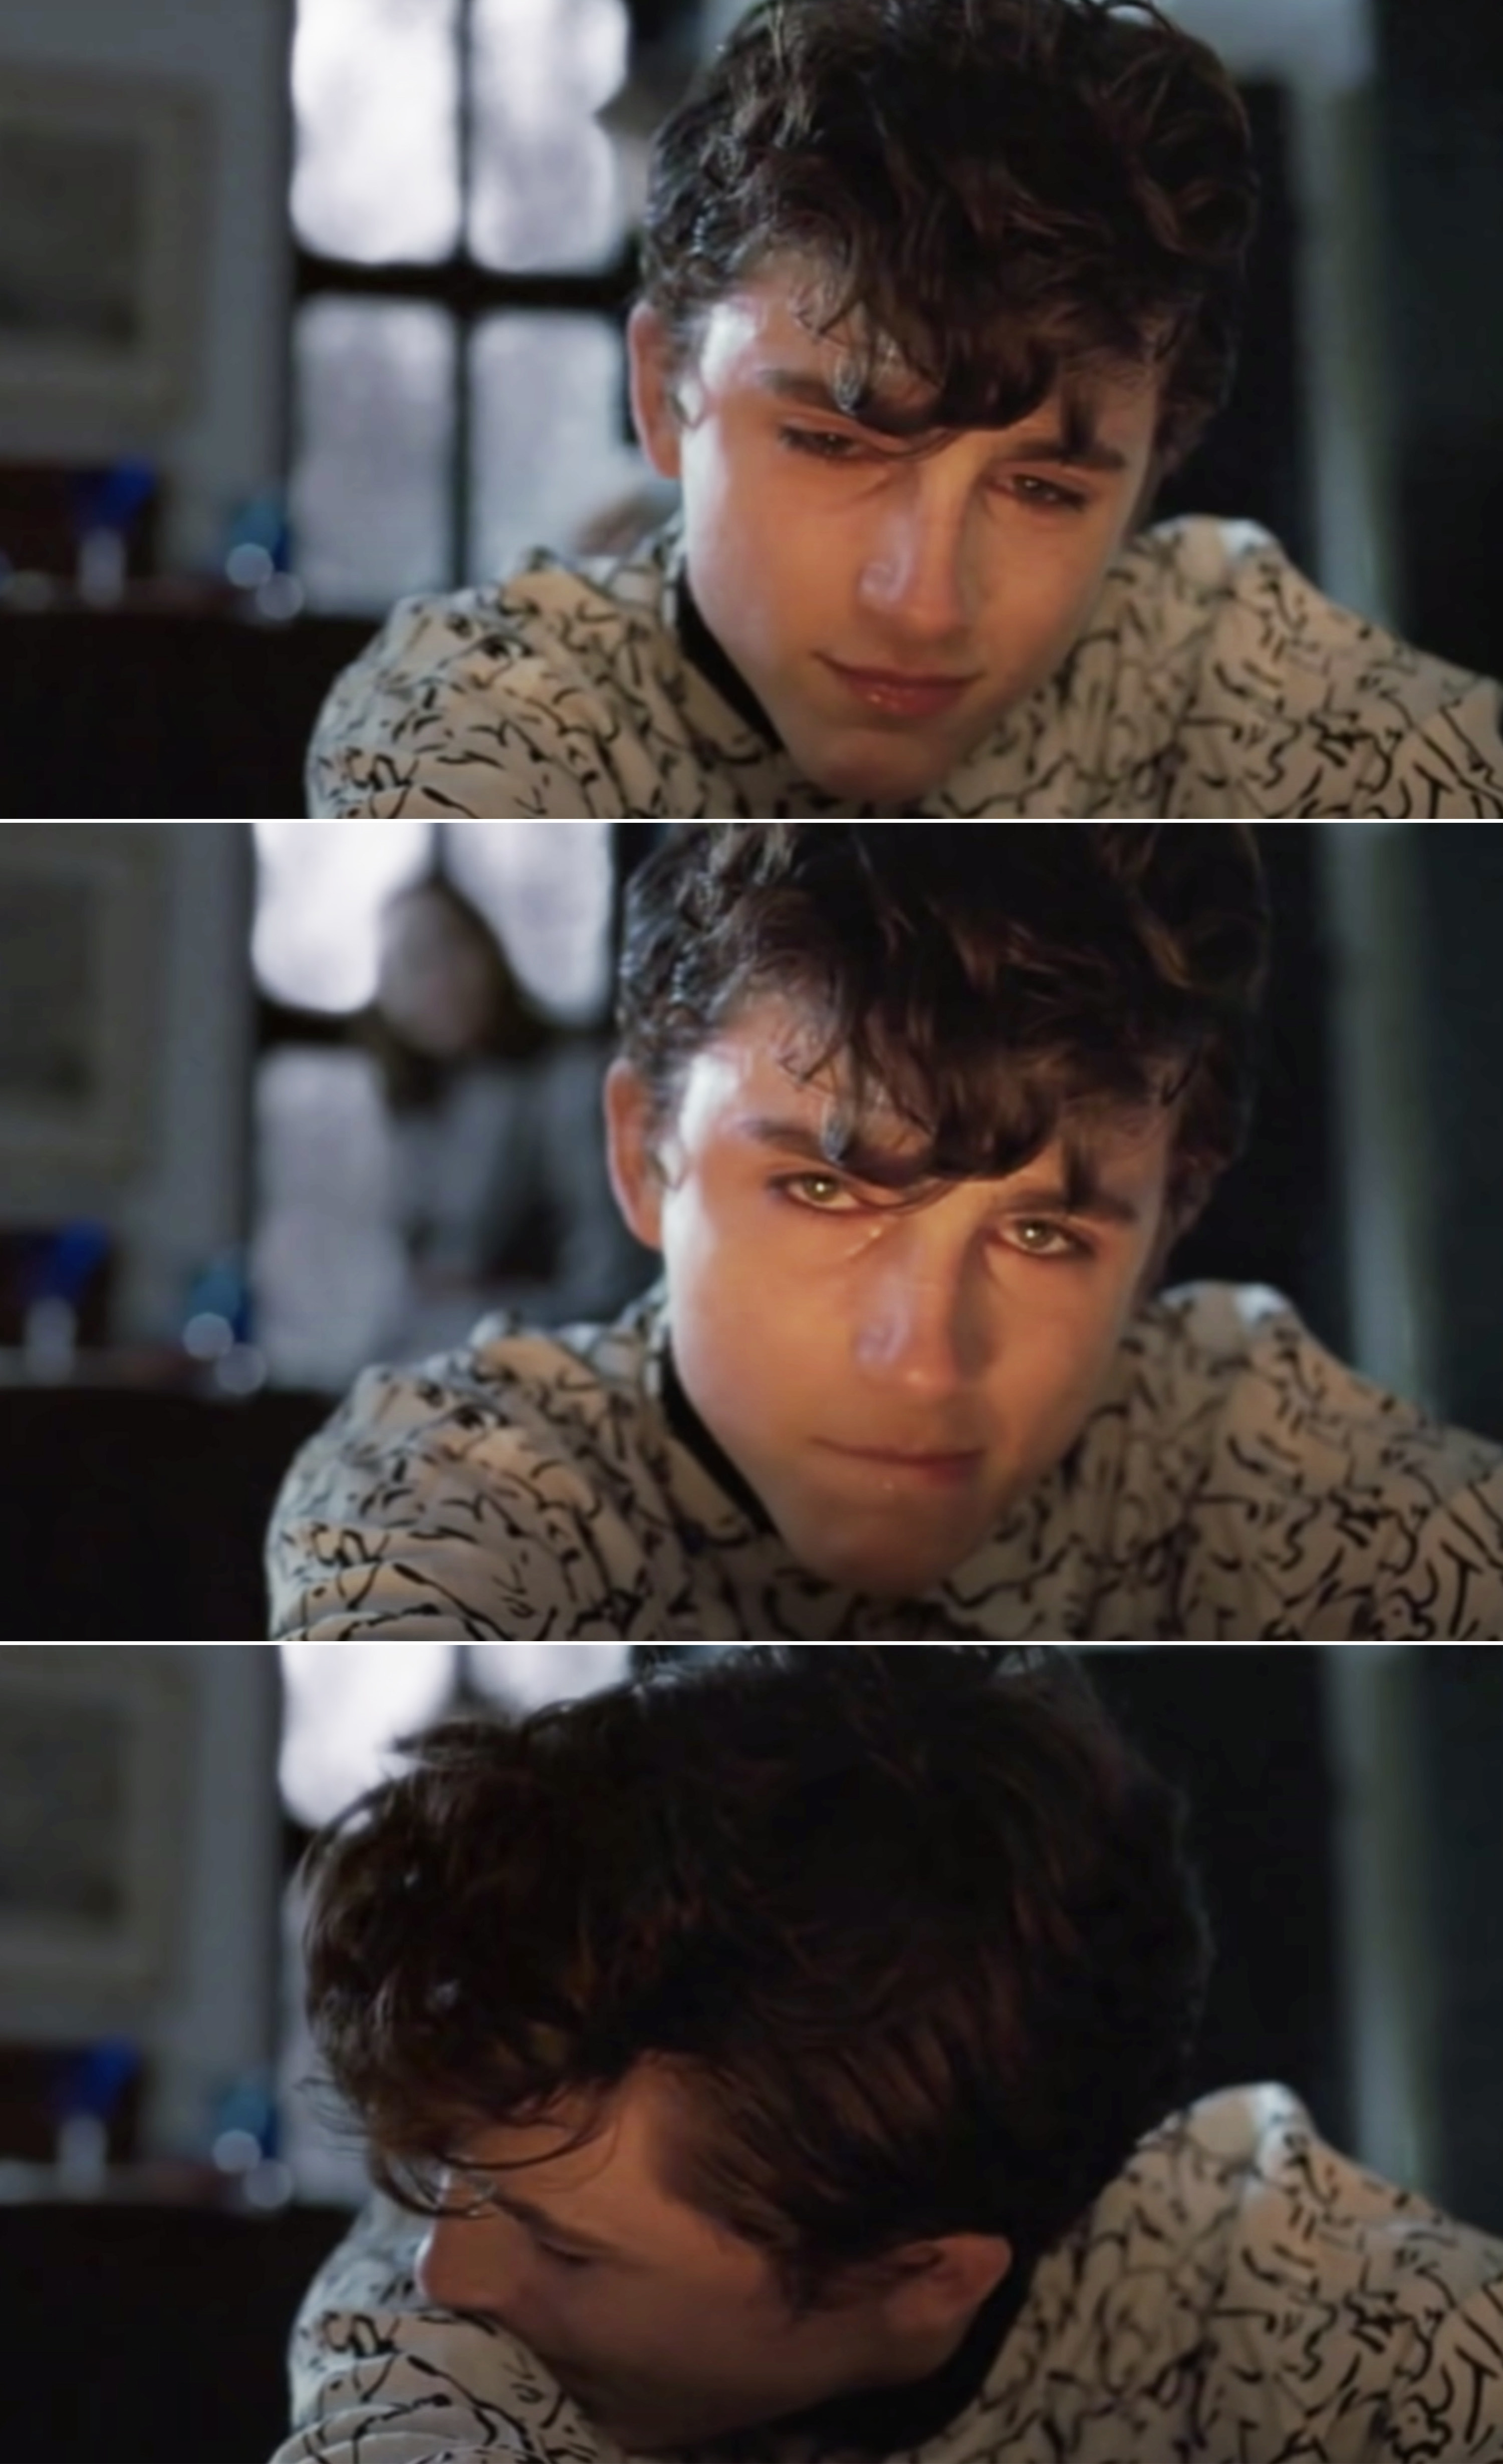 Elio crying and looking into the camera